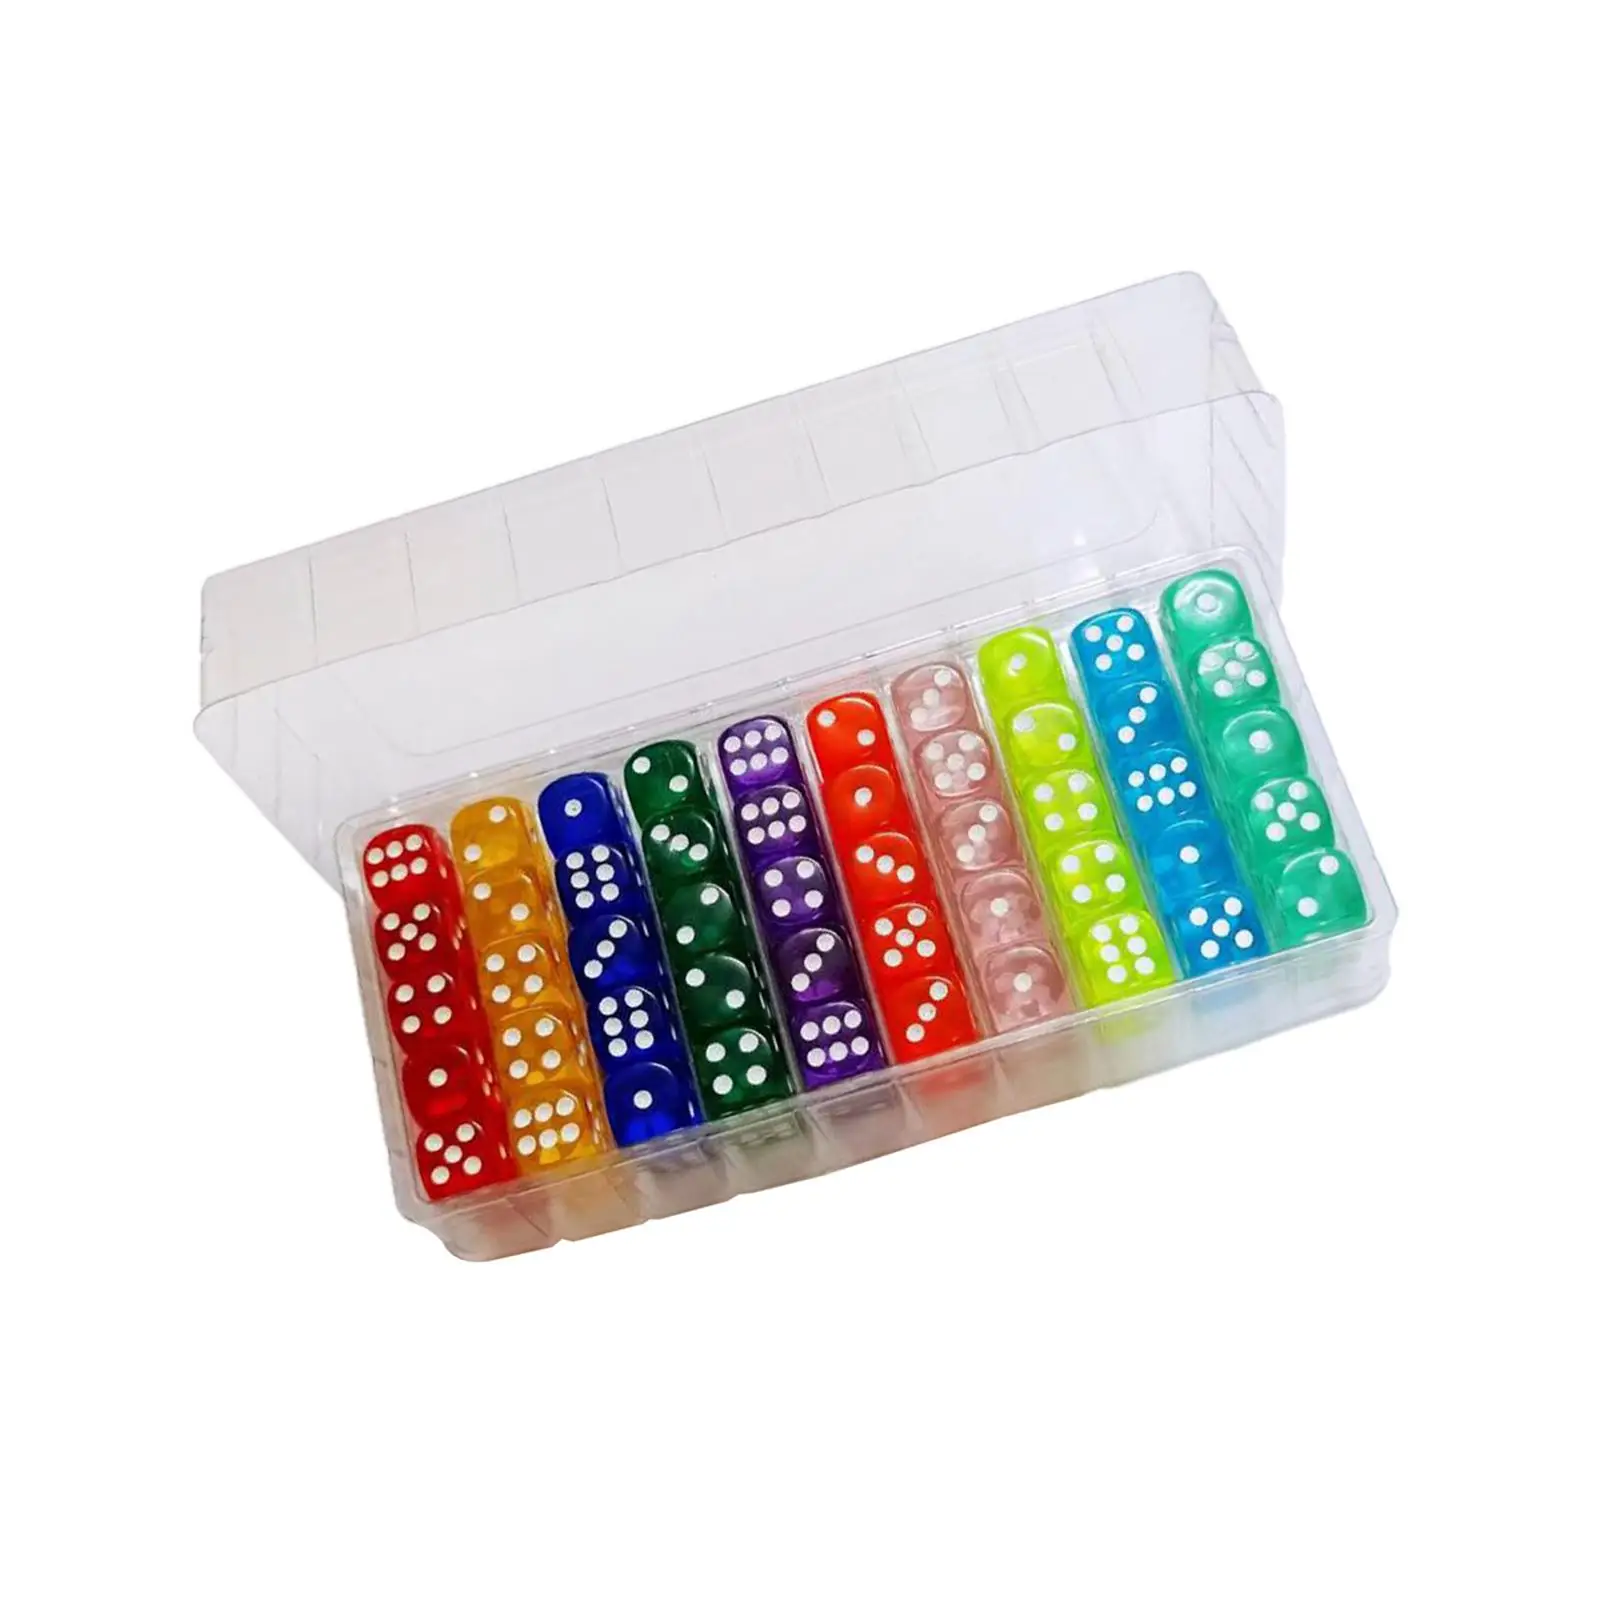 100Pcs 6 Sided Dice Set Translucent Colors Acrylic Dice Round Corner 14mm for Playing Games Party Favors Gifts Teaching Math